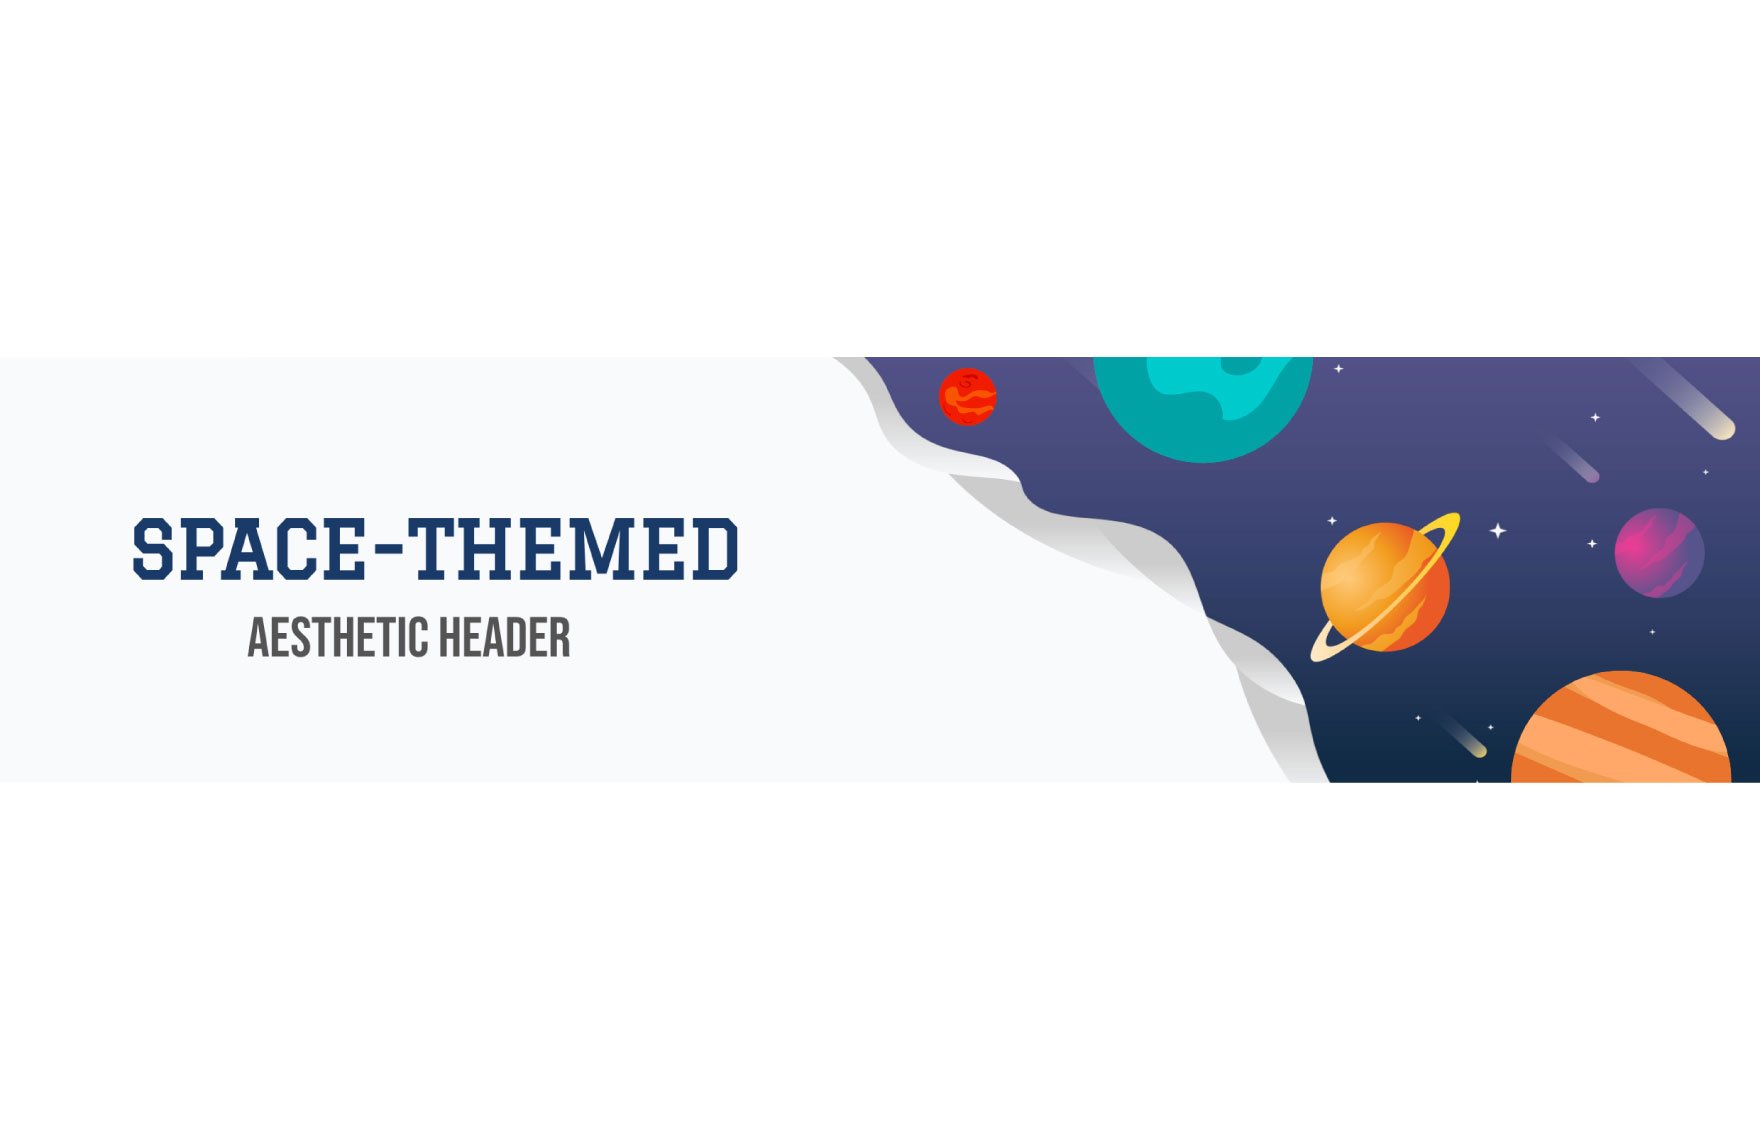 Space-themed Aesthetic Header Template